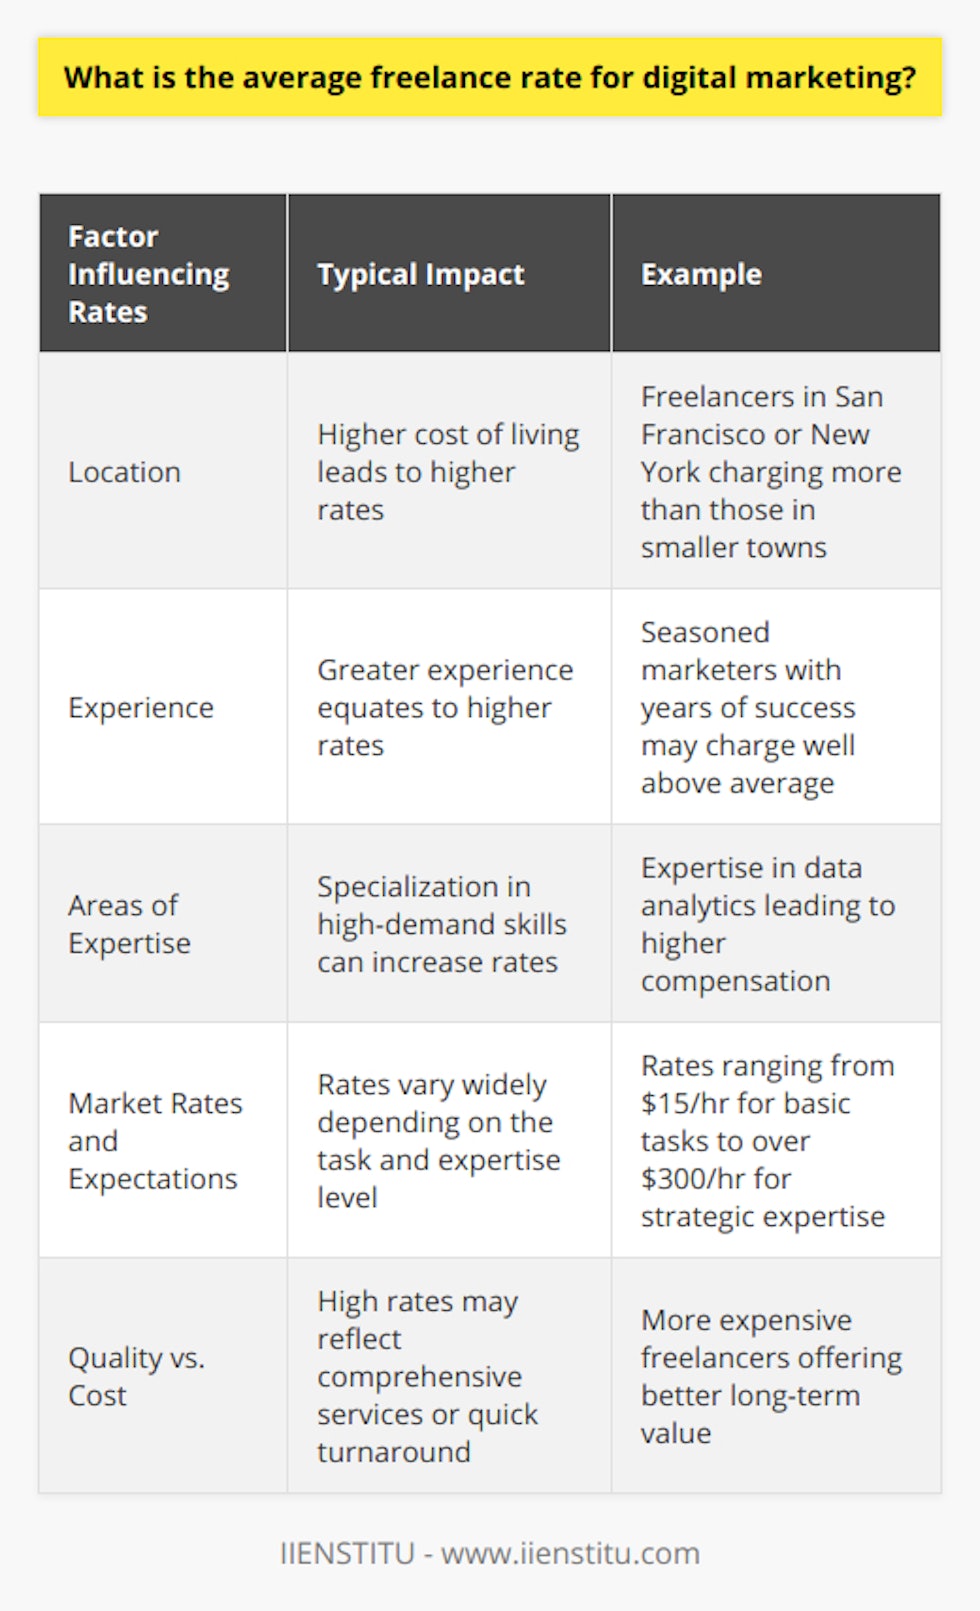 Freelance rates for digital marketing experts vary significantly based on several critical factors, shaping the financial landscape for professionals in this sector. It's essential to note that specific numbers will fluctuate and the following insights provide an understanding of the current market trends and influencing elements.Impact of LocationGeographically speaking, location exerts a profound influence on freelance rates. Digital marketers located in regions with a higher cost of living typically demand greater compensation. For example, freelancers in cities like San Francisco or New York may charge more than those in smaller towns or countries with lower living expenses. Conversely, digital marketers in emerging markets may offer more competitive rates, leveraging currency exchange rates and cost advantages.Experience CountsWith experience, there's an expectation of quality and insight that comes with a price. Seasoned digital marketers, boasting years of successful campaigns and a robust portfolio, might charge significantly more than newcomers to the field. Their extensive knowledge and strategic acumen become a valuable asset, often justifying higher rates.Areas of ExpertiseDigital marketing is a broad field, including SEO, content marketing, social media marketing, email marketing, and more. Specialists in high-demand areas, or those with a rare combination of skills, may command higher fees. For instance, expertise in conversion rate optimization or proficiency in data analytics could lead to above-average rates.Market Rates and ExpectationsThough it is challenging to pinpoint an exact average rate, surveys and freelance platforms suggest a broad spectrum. Rates can start at an accessible entry point of around $15 per hour for basic tasks and extend beyond $300 per hour for strategic consultation or expertise in a high-demand niche. Amidst this range, intermediate rates of $50 to $200 per hour are common among professionals with a solid track record.Quality Versus CostIt's not solely about the highest bidder when seeking quality digital marketing services. Clients should weigh factors such as communication skills, efficiency, portfolio quality, and client testimonials. A more expensive freelancer may offer comprehensive services or swift turnaround times, potentially providing better value for money in the long run.In ReviewIn summary, there is no one-size-fits-all average freelance rate for digital marketing due to the dynamic nature of the factors at play. Rates are influenced by geographical presence, the freelancer's experience level, their area of expertise, and the going market rates based on current industry demands. Clients and freelancers alike must navigate this landscape with a keen understanding of value, expertise, and budget considerations to forge successful partnerships.